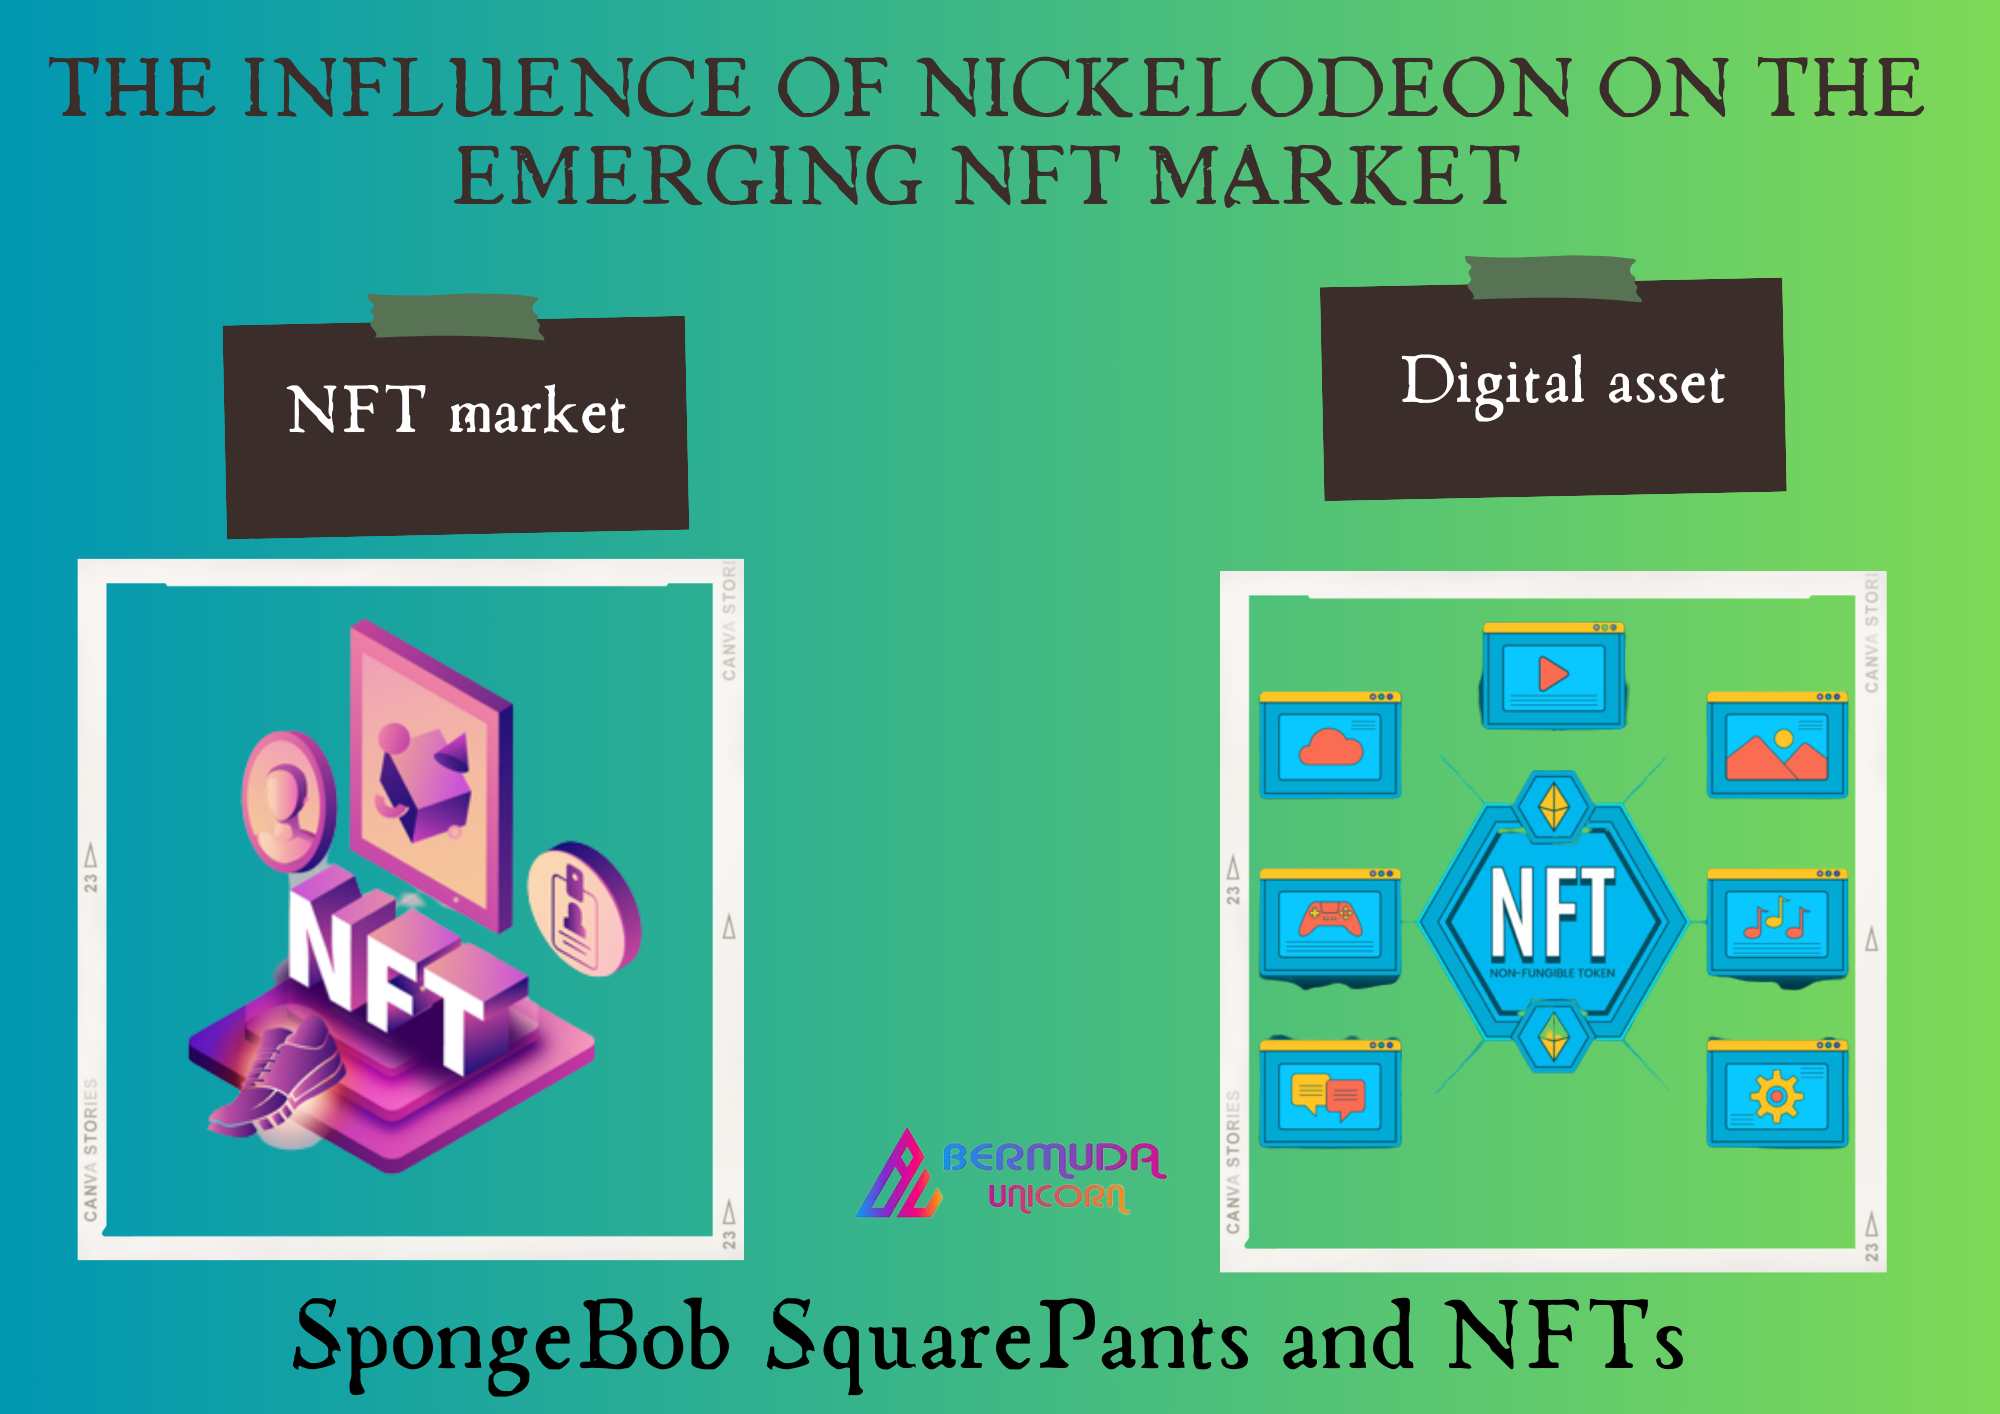 The Influence of Nickelodeon on the Emerging NFT Market